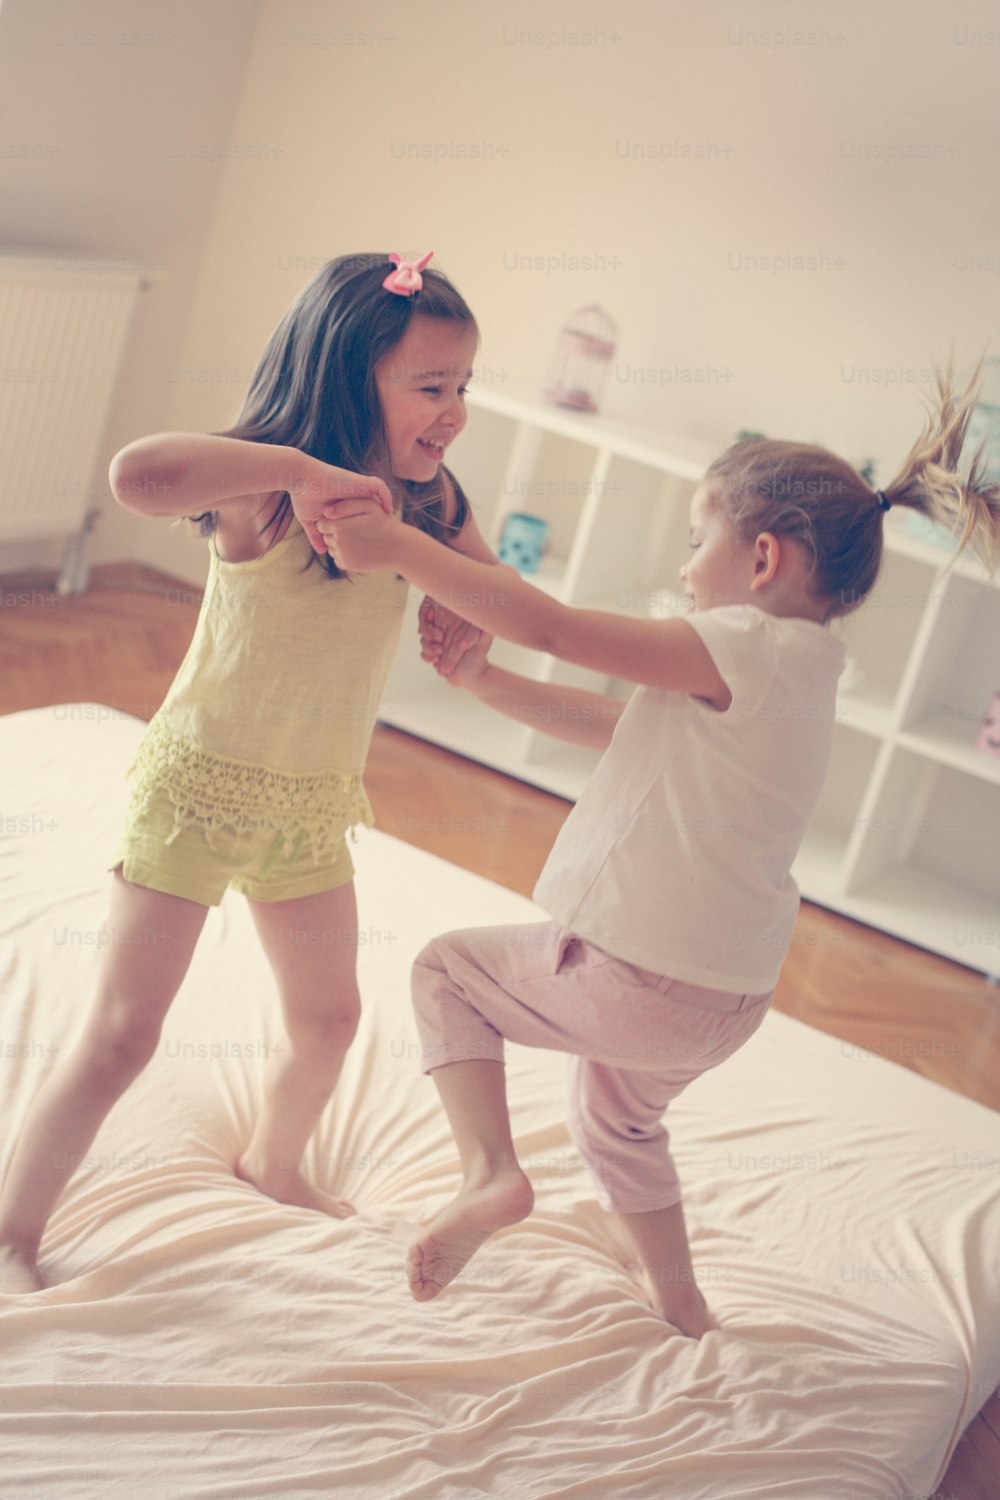 Little girls playing together in bed. Two little girls jumping on bed.